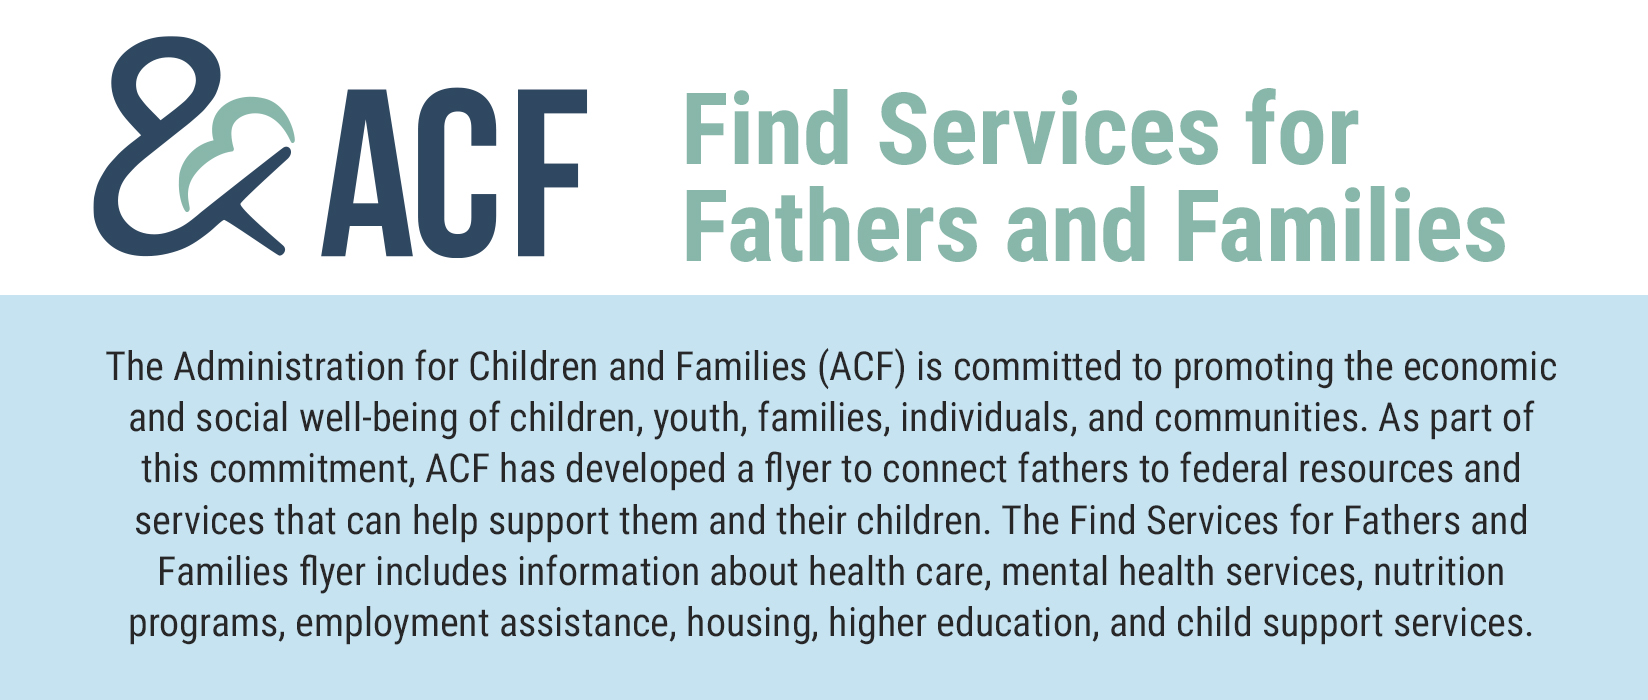 Services for Fathers and Families